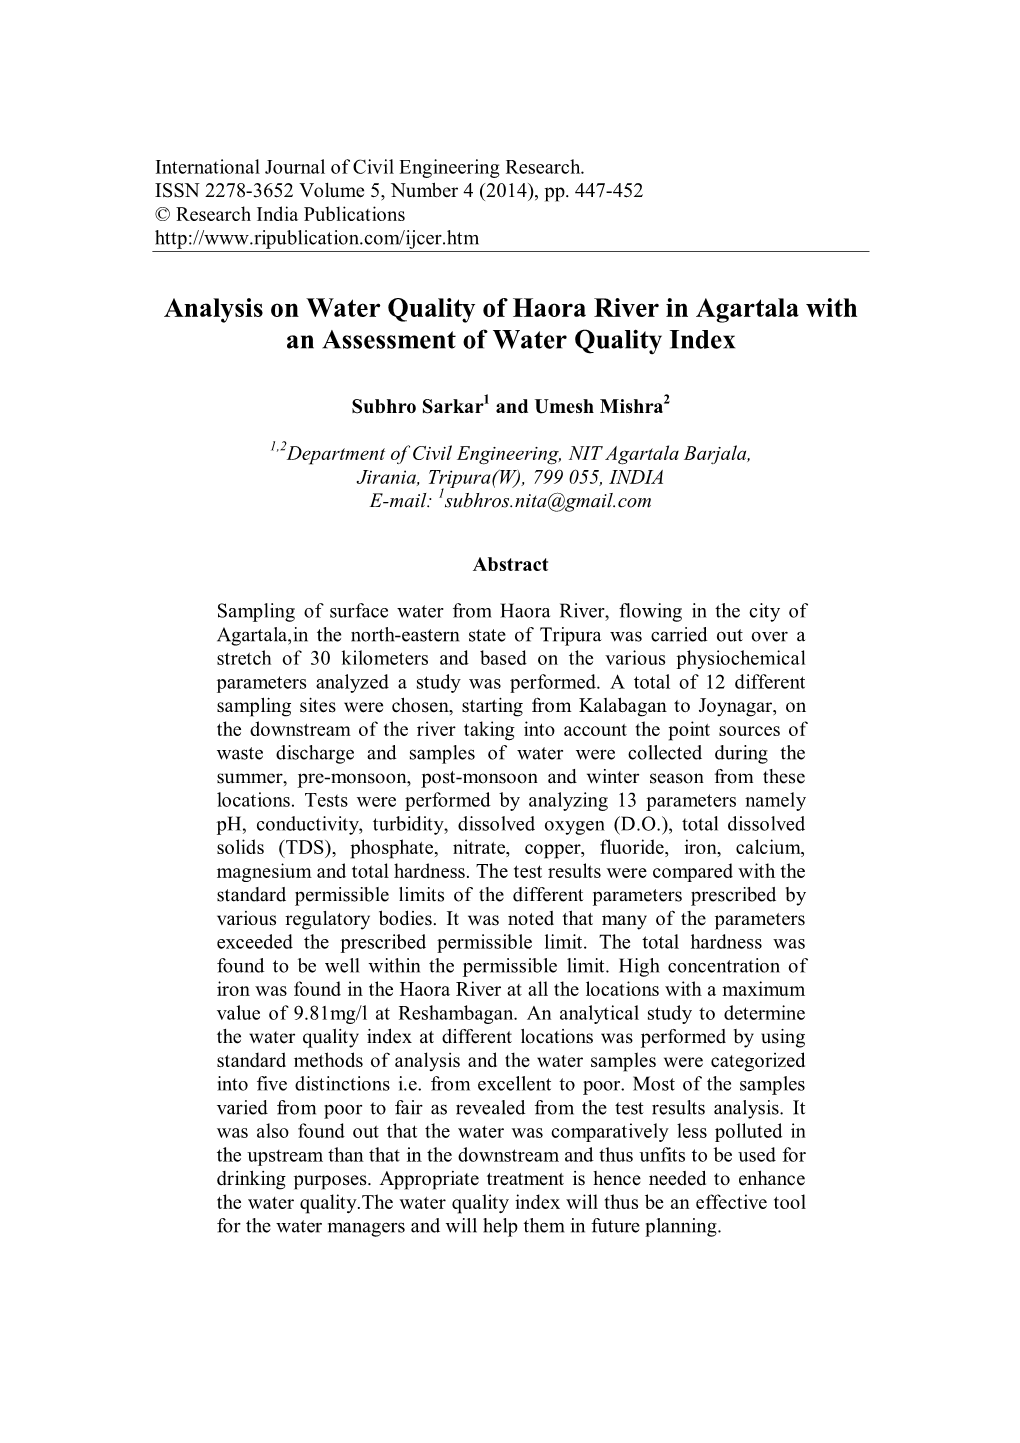 Analysis on Water Quality of Haora River in Agartala with an Assessment of Water Quality Index